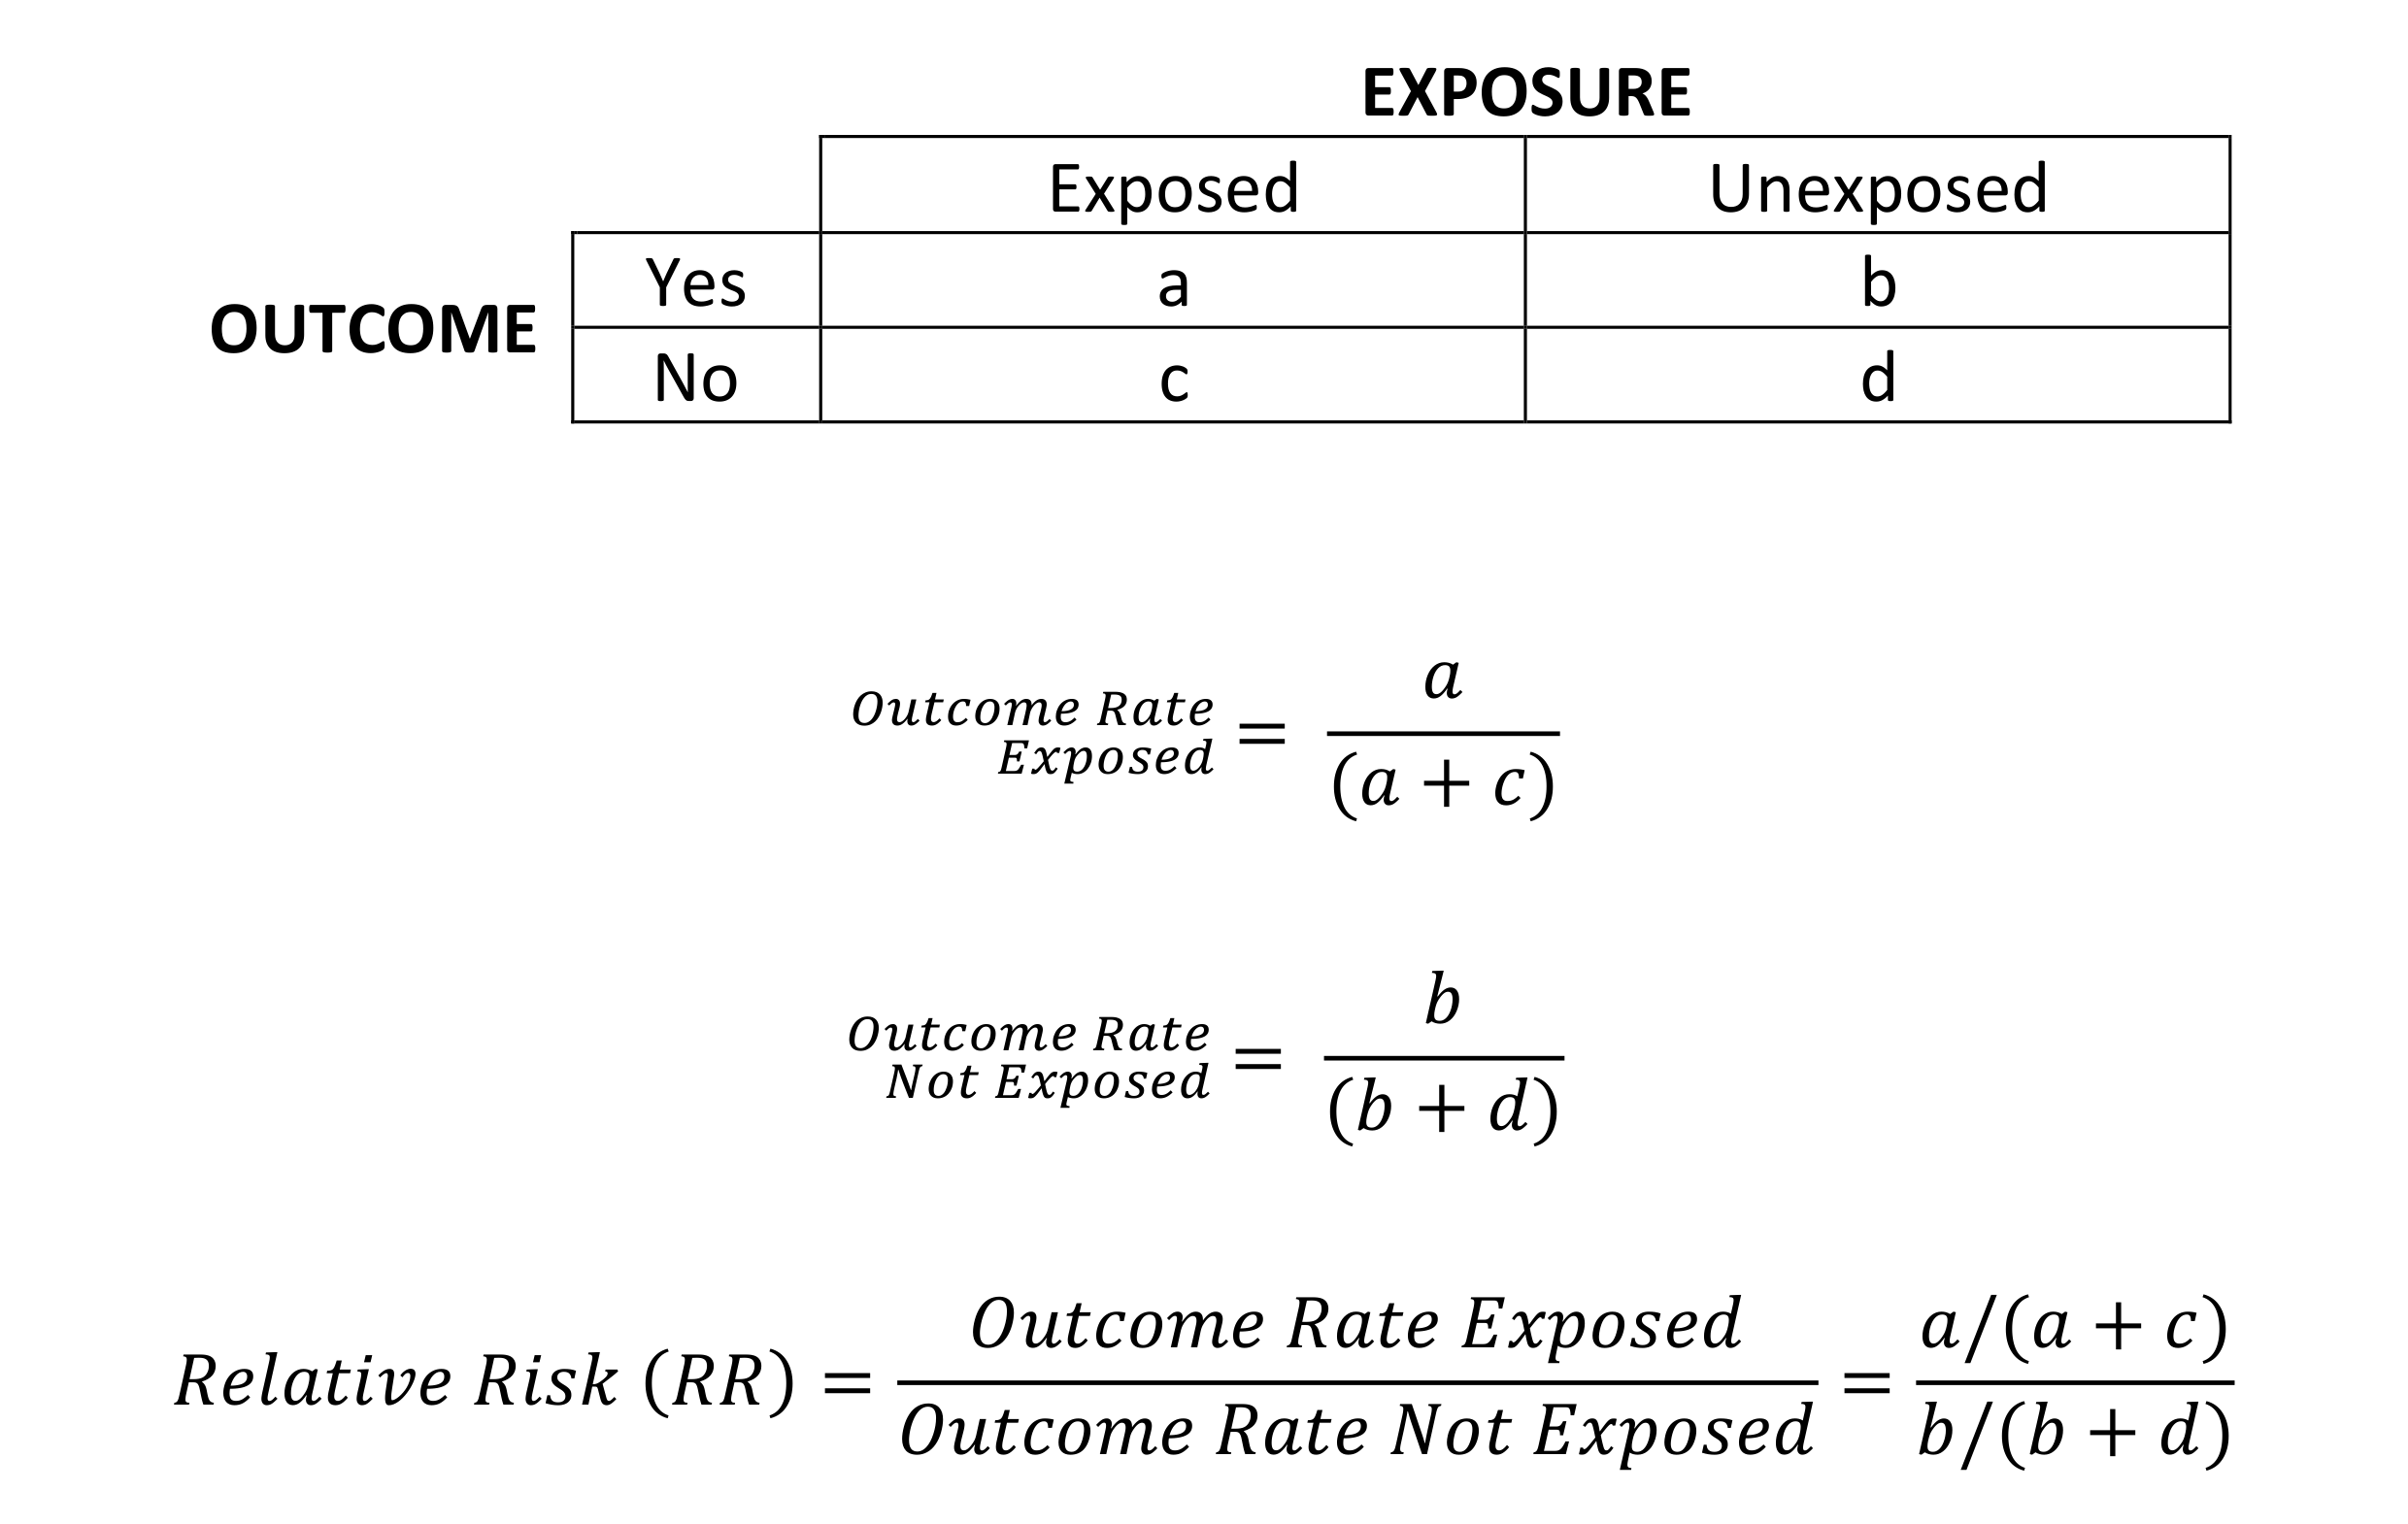 Calculation of Relative Risk